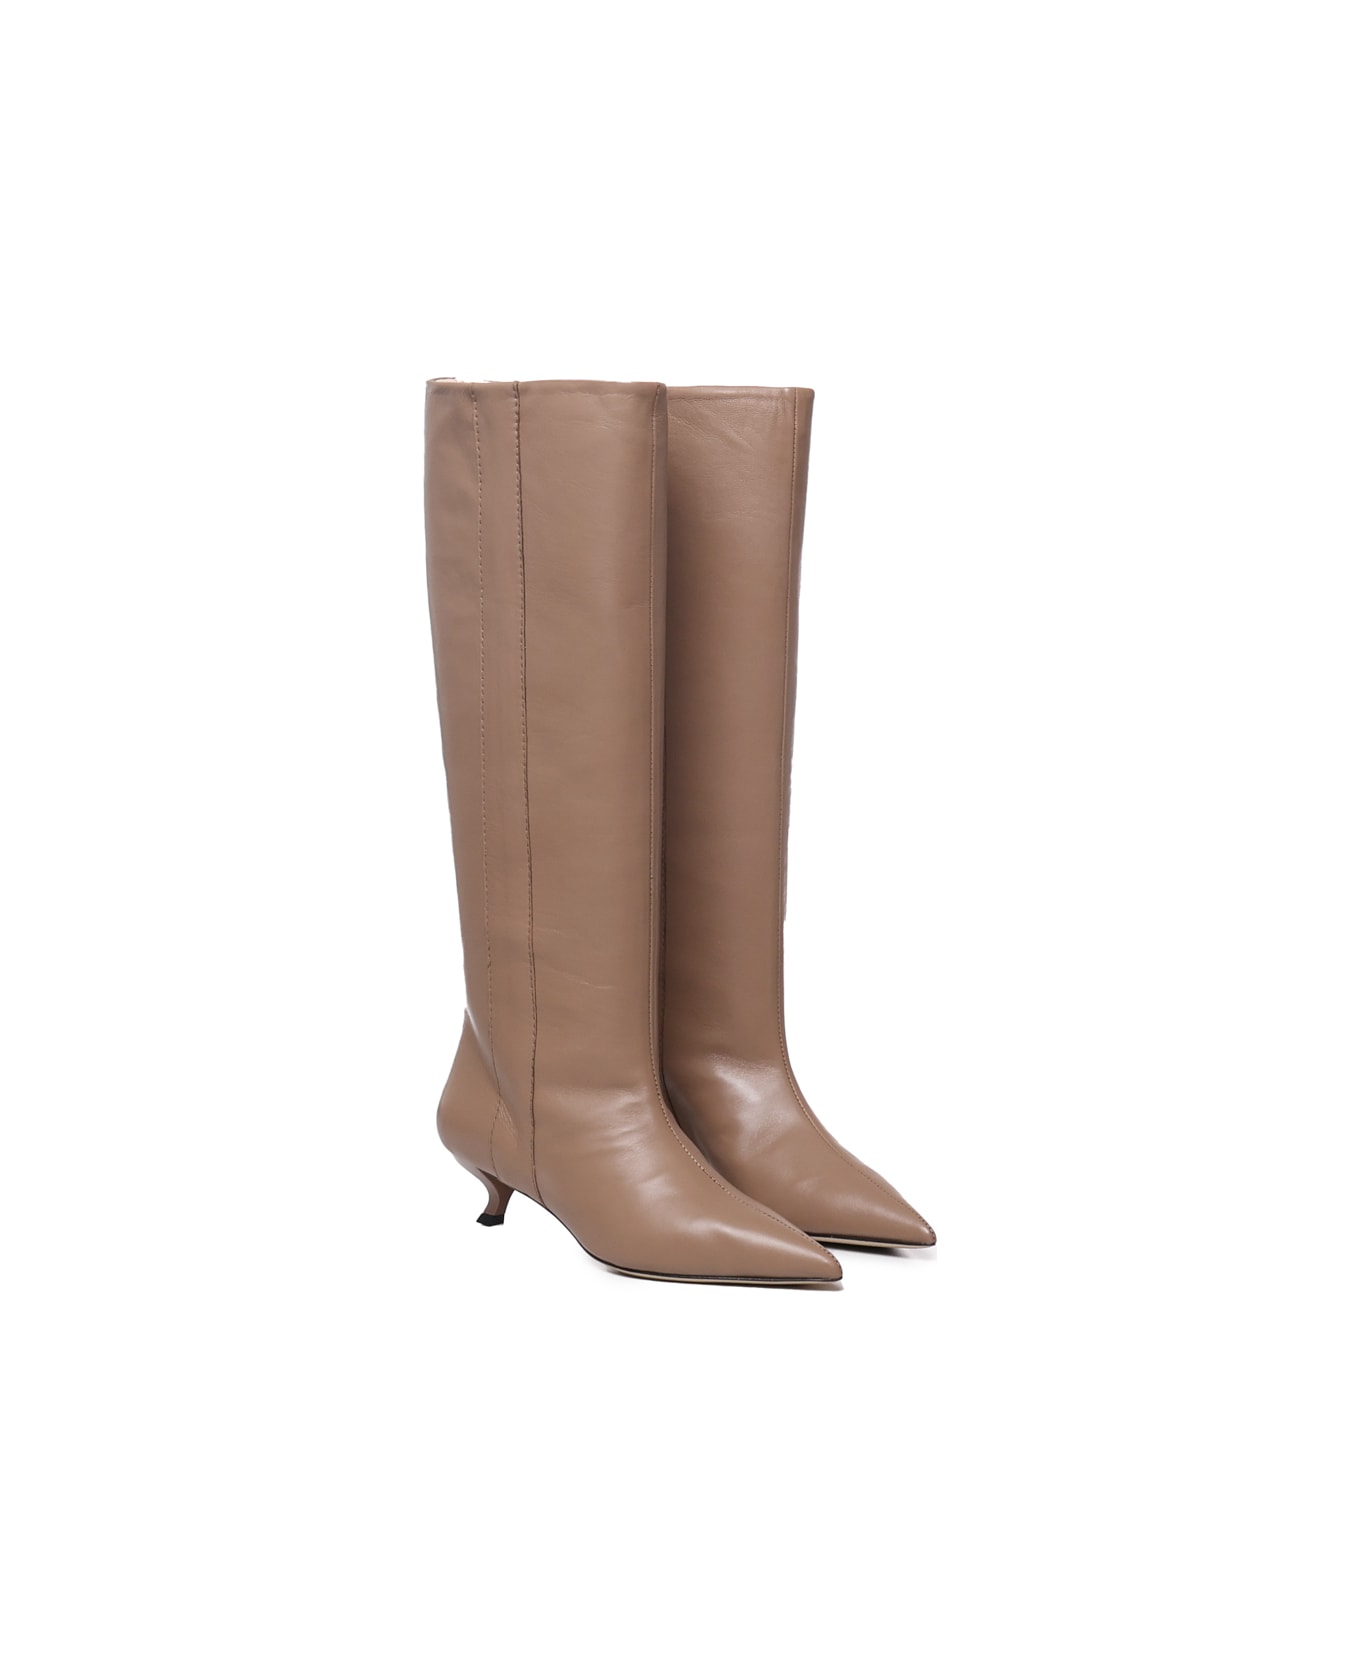 Alchimia Low Heel Leather Boots - Nude